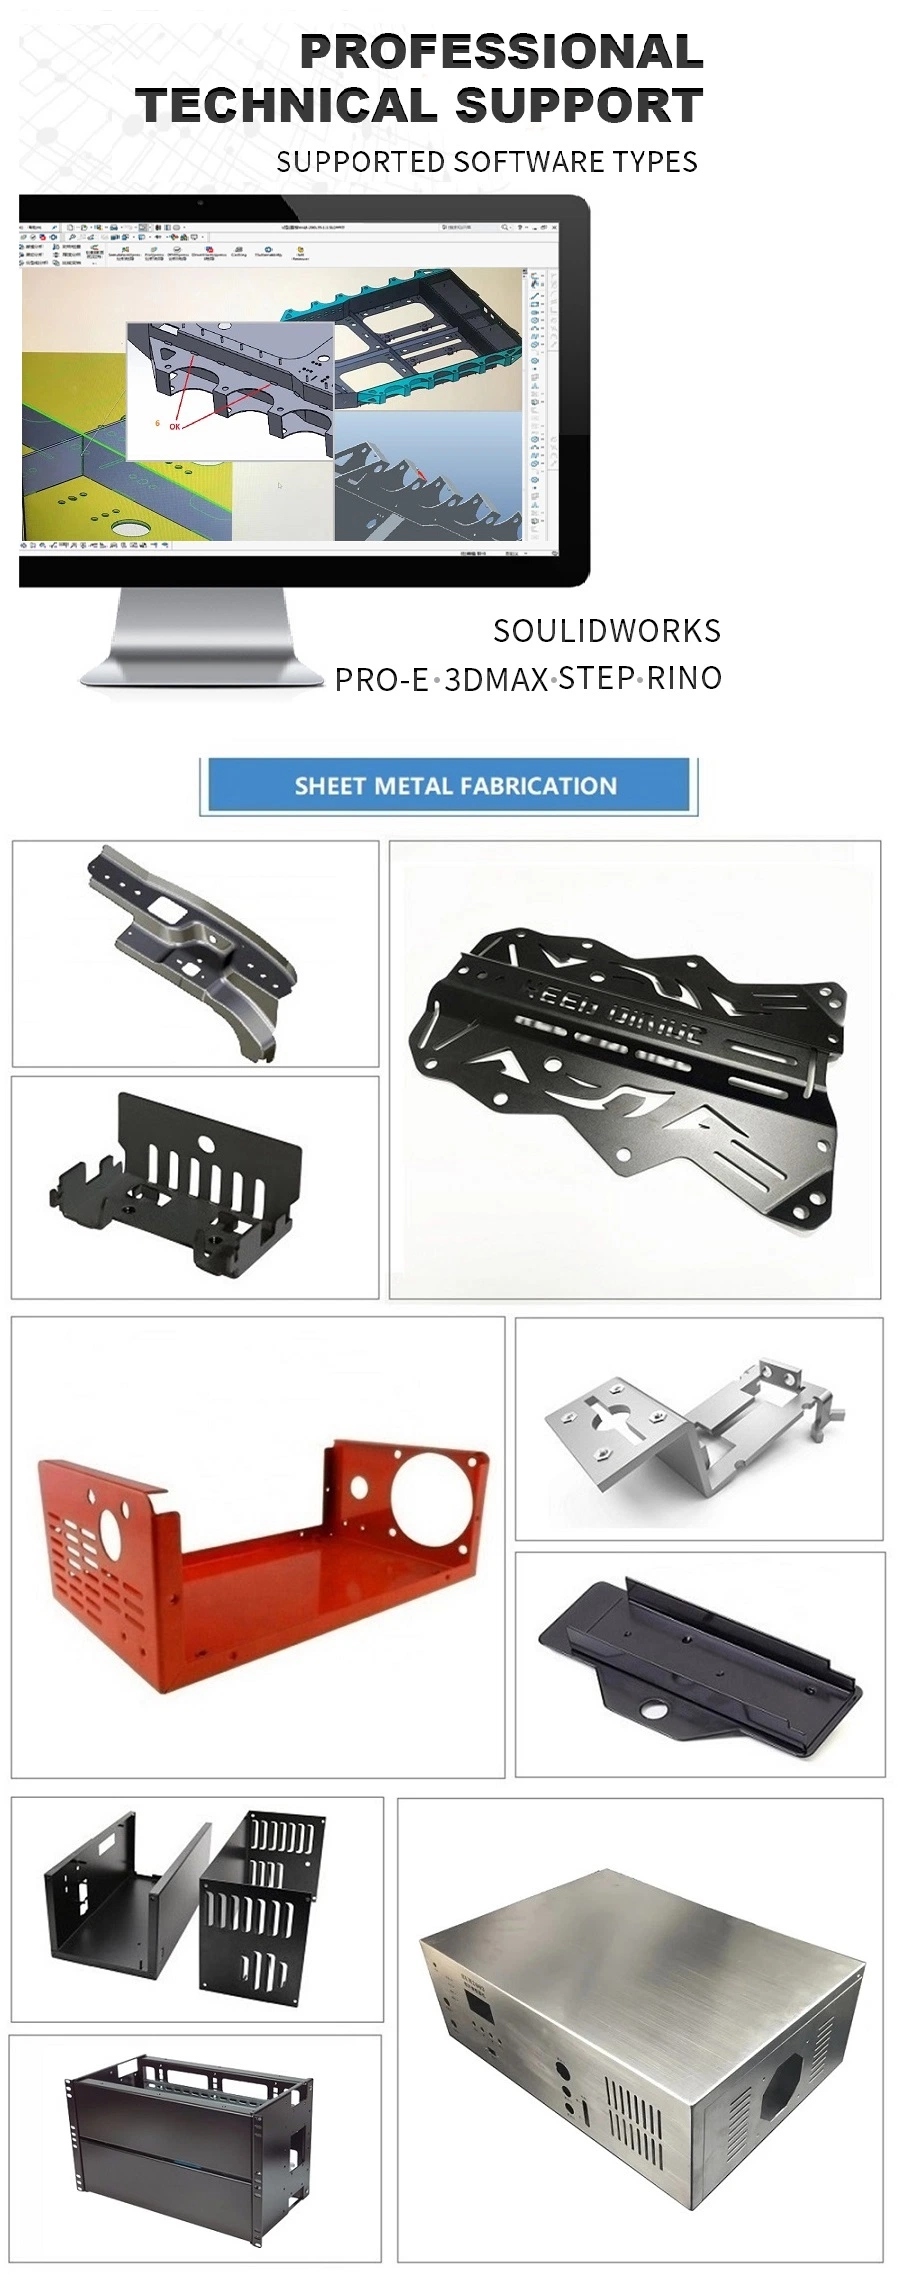 High Precision OEM/ODM Sheet Metal Fabrication Services